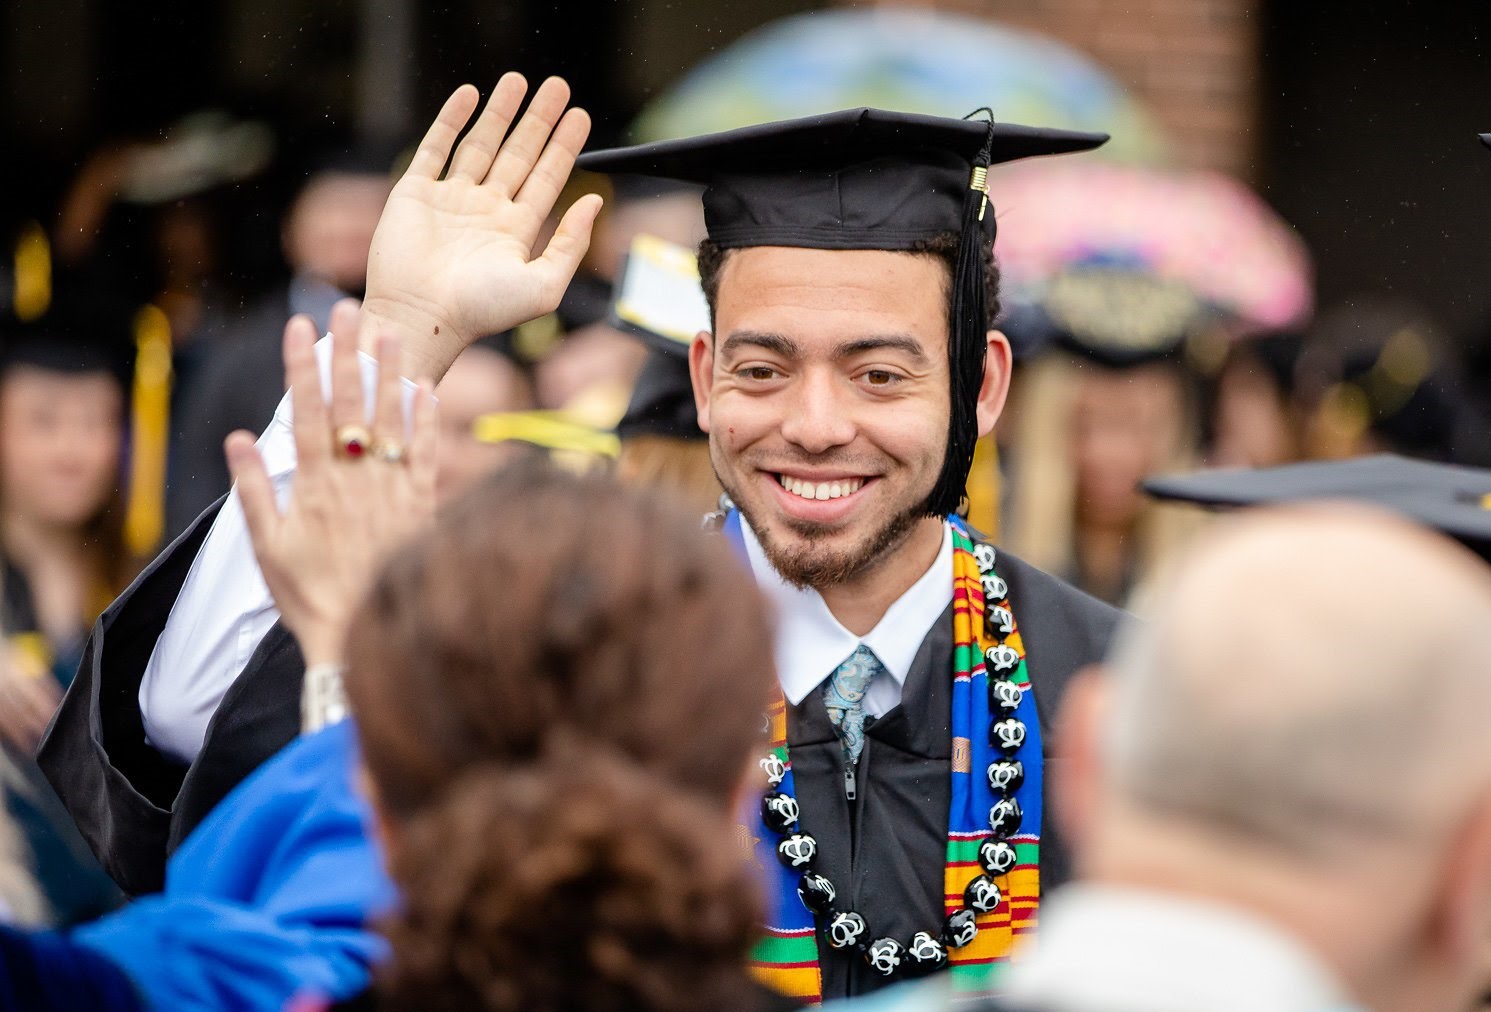 Graduating student giving a high-five